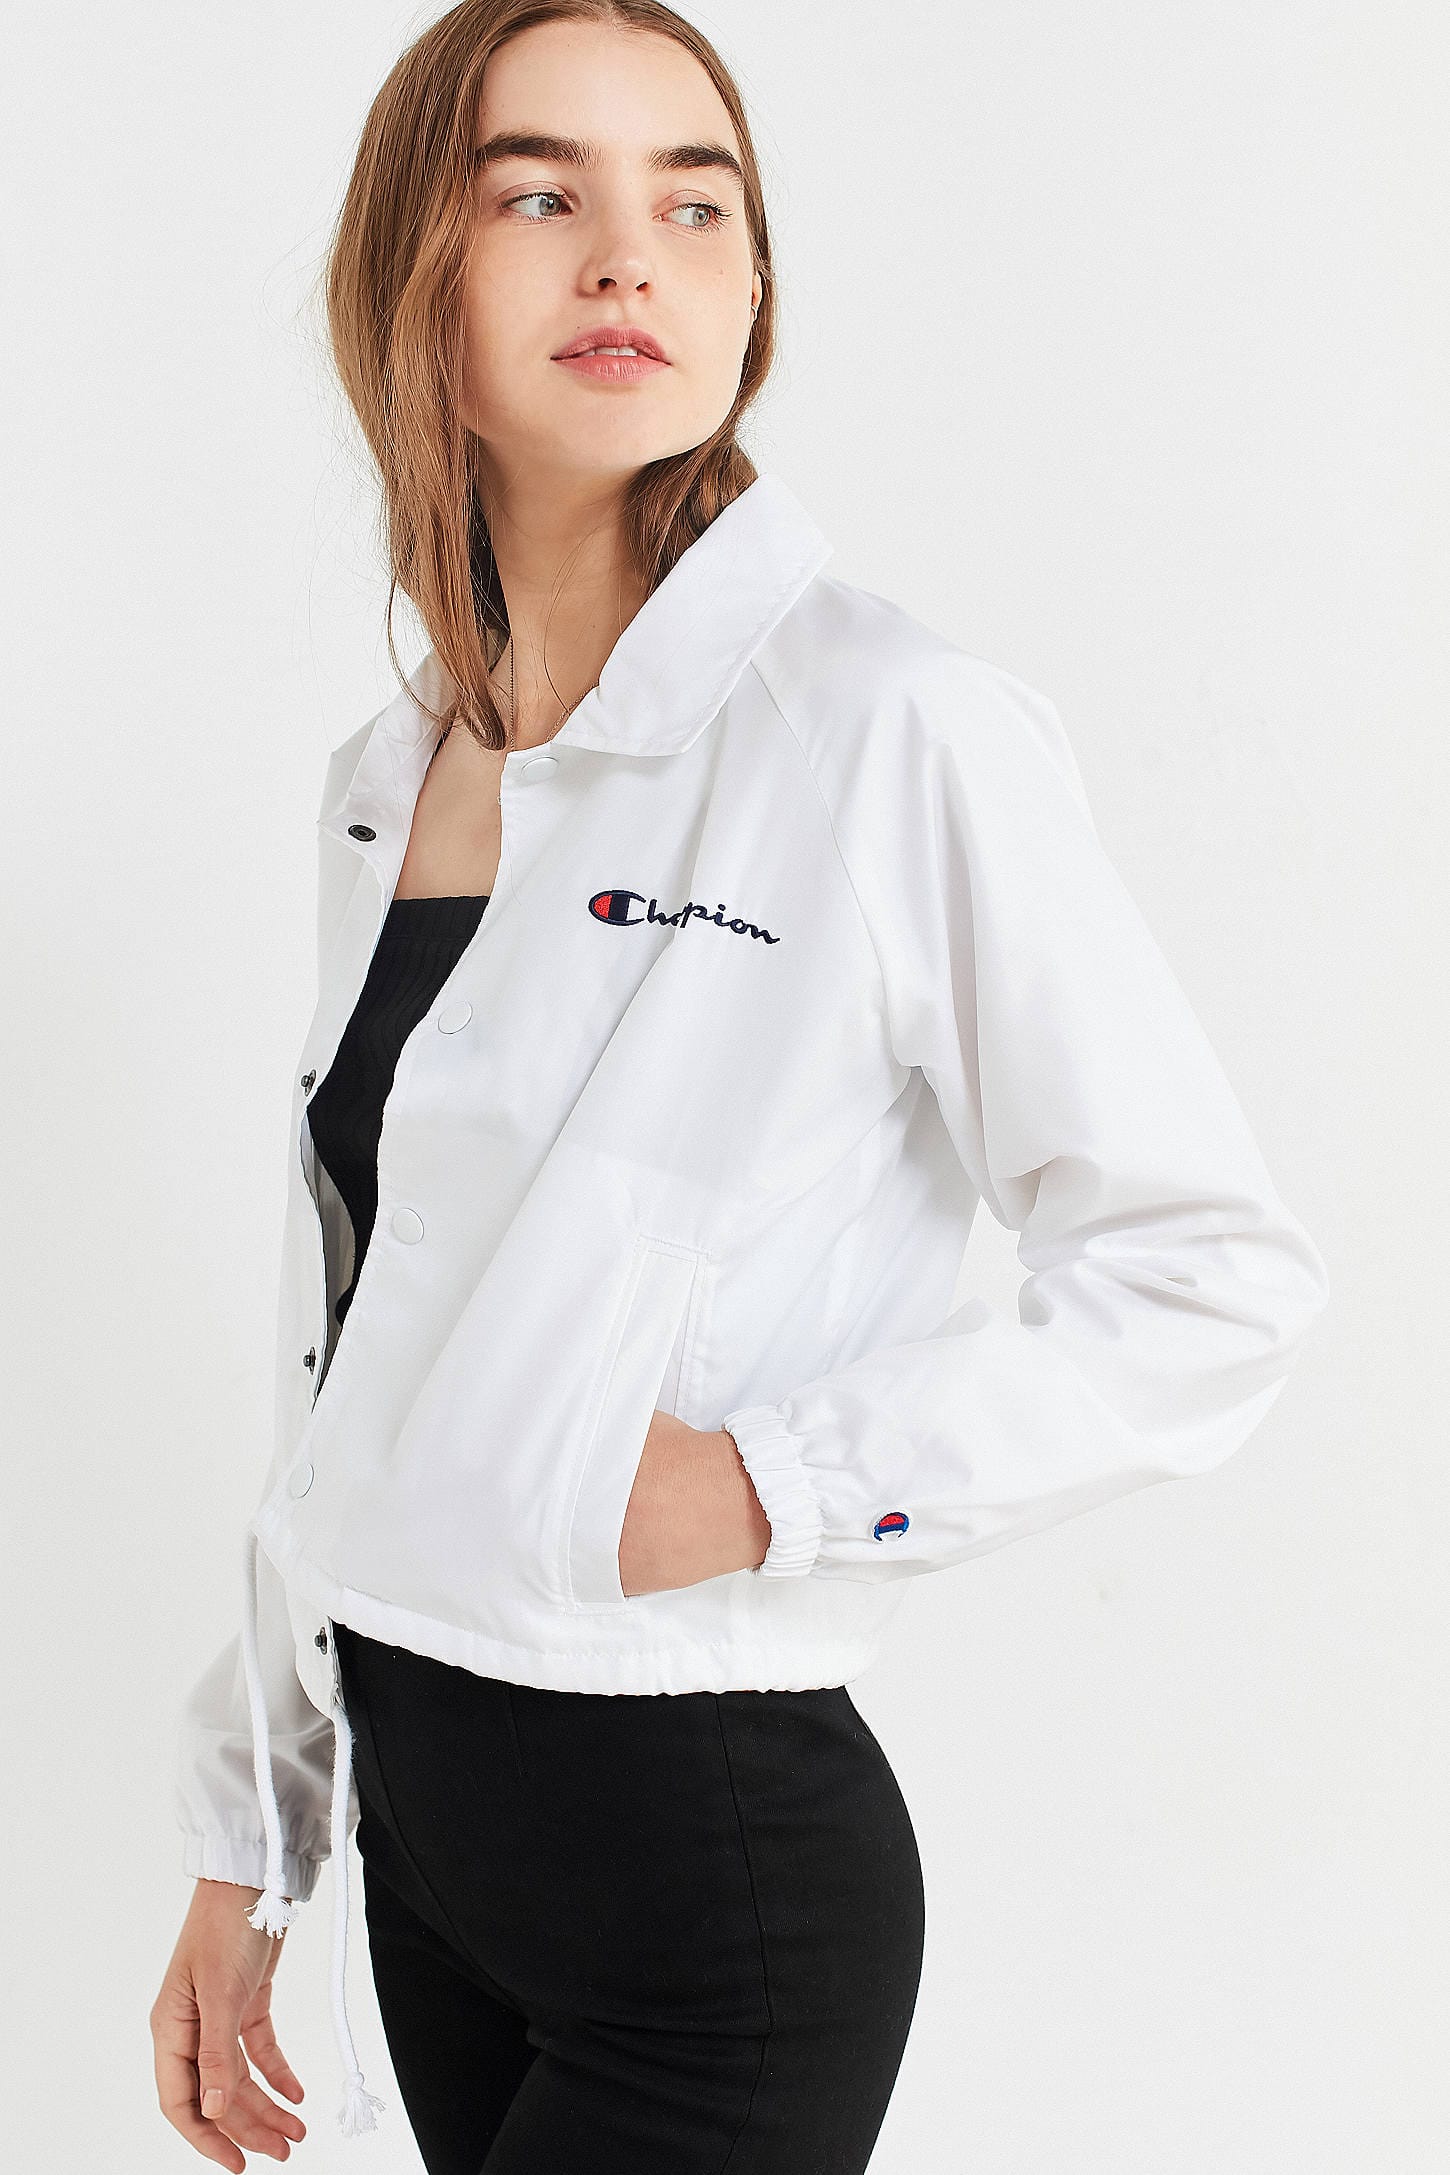 Champion Cropped Coaches Jacket Online, 58% OFF | www.vetyvet.com